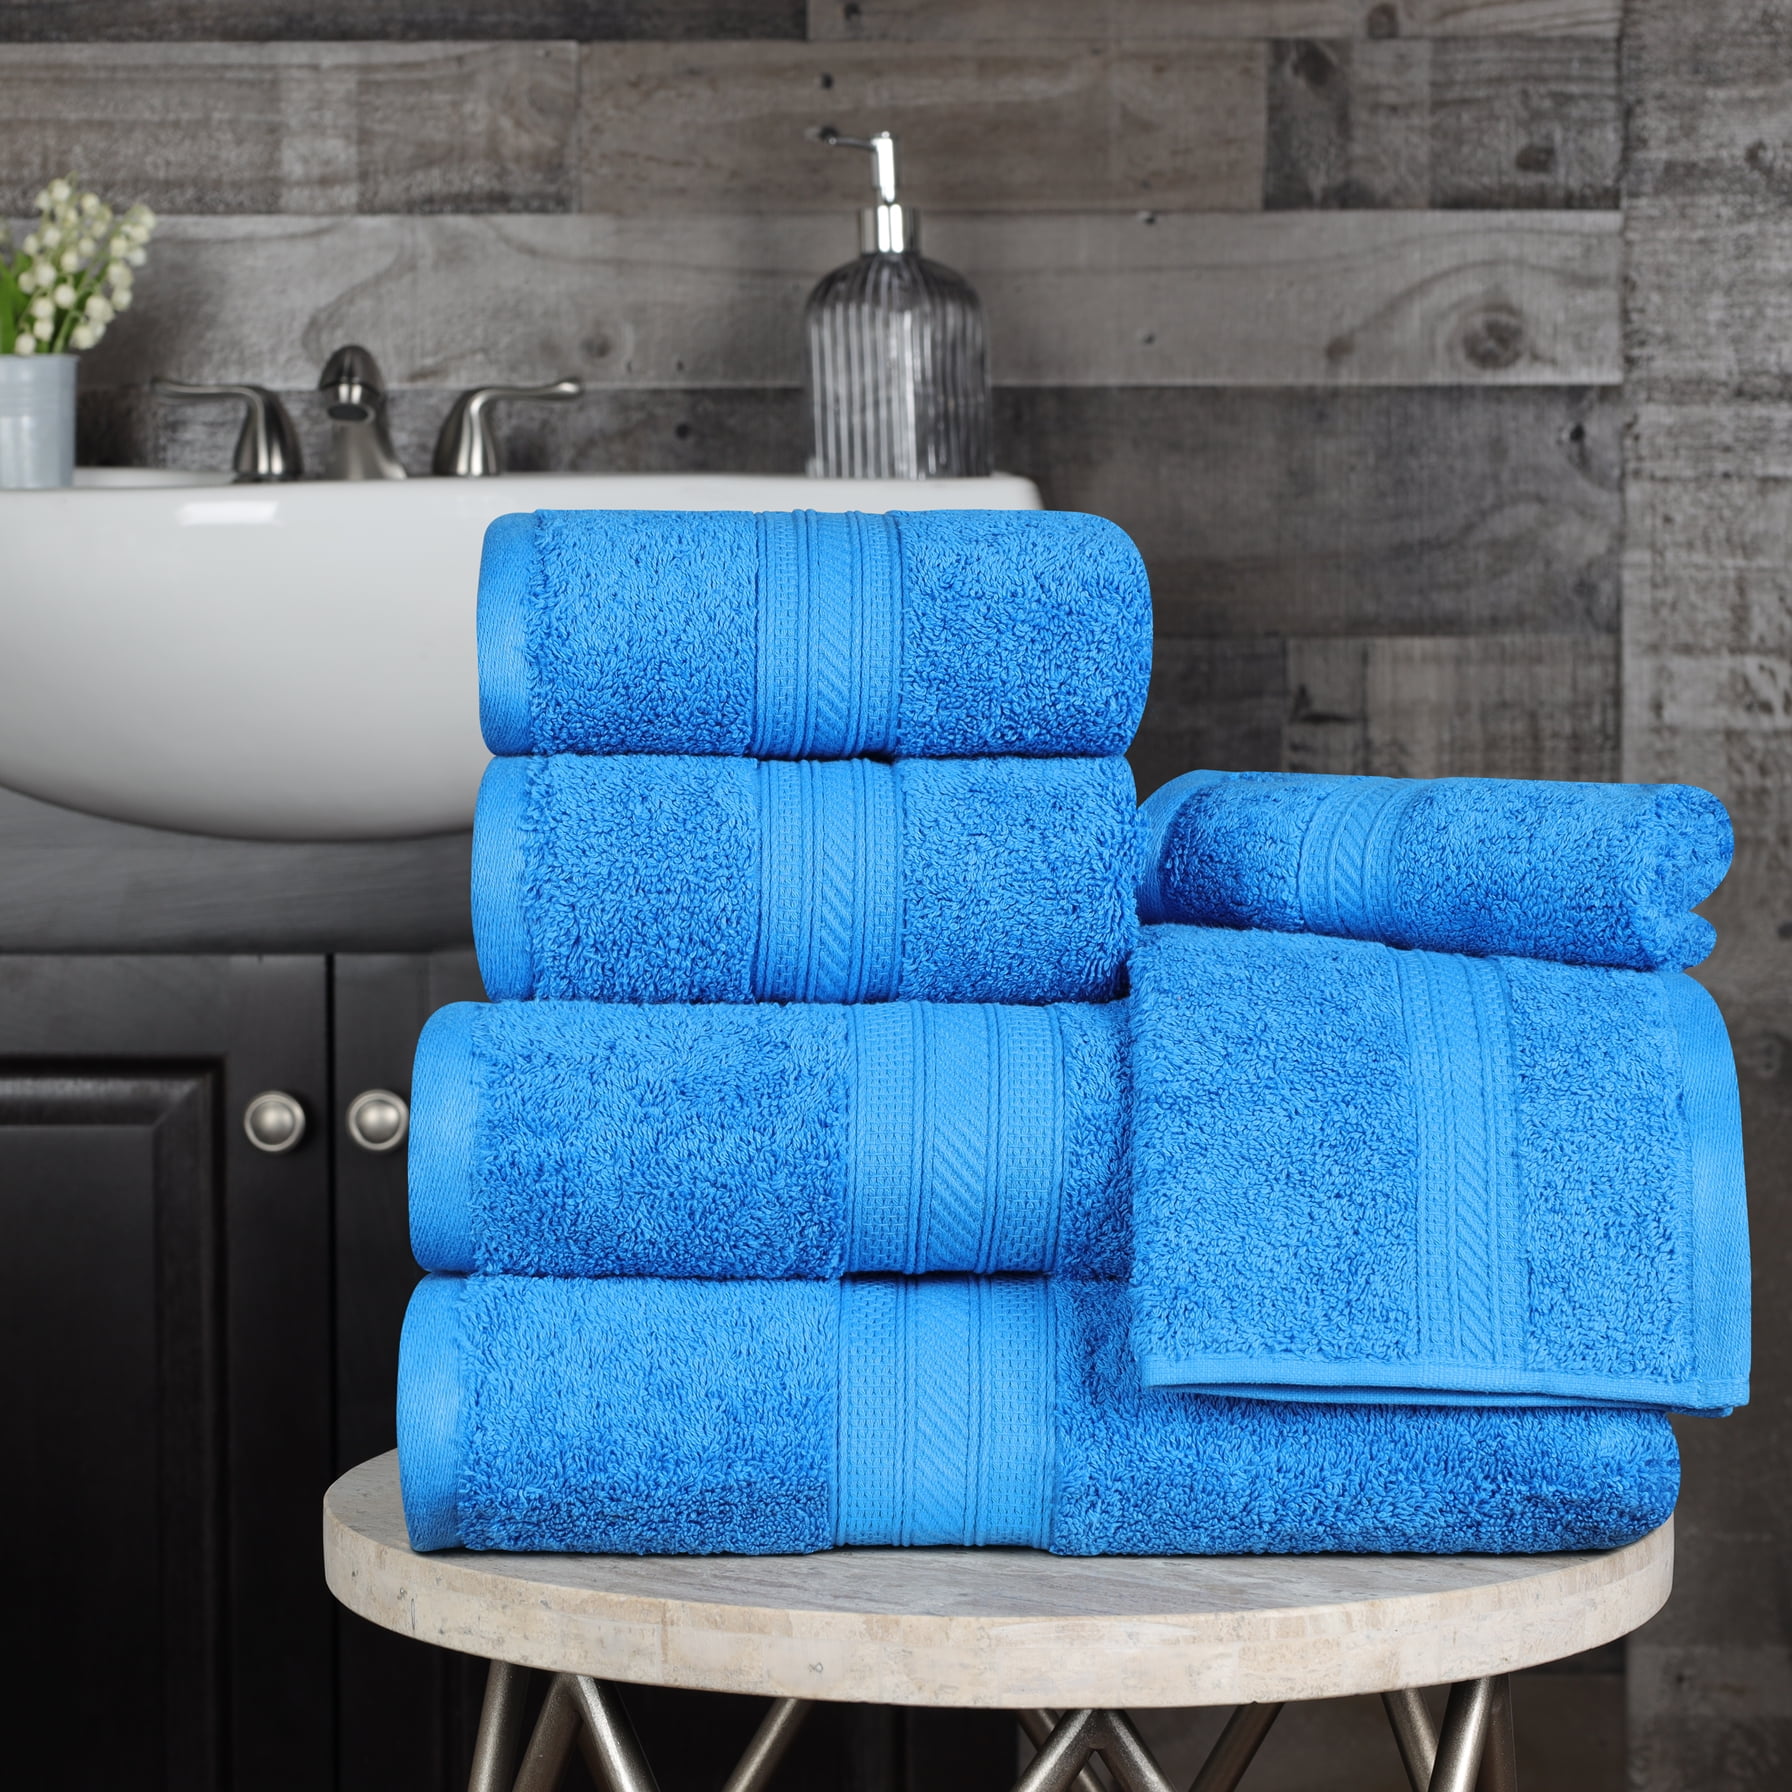 50x100cm Premium Hand Towels Ultra Soft and Highly Absorbent Face - Easy Care,Multipurpose Use for Bath Gym and Spa 100/% Egyptain Cotton HAND Towel Luxury Hand Genuine 650 GSM Blue, 2Pack